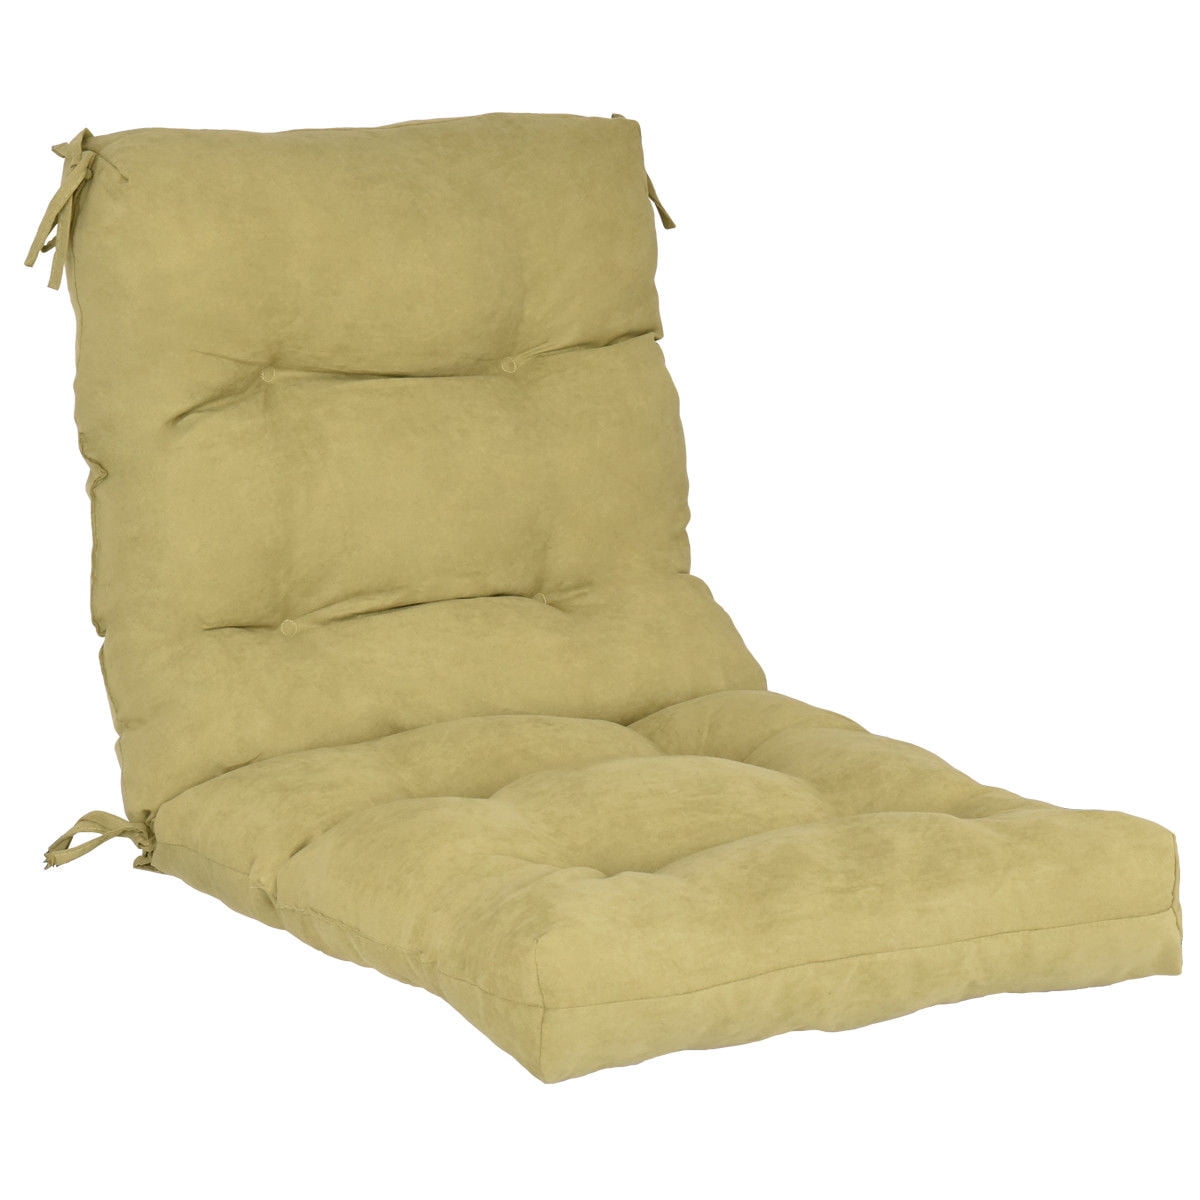 42" seatback chair cushion tufted pillow indoor outdoor